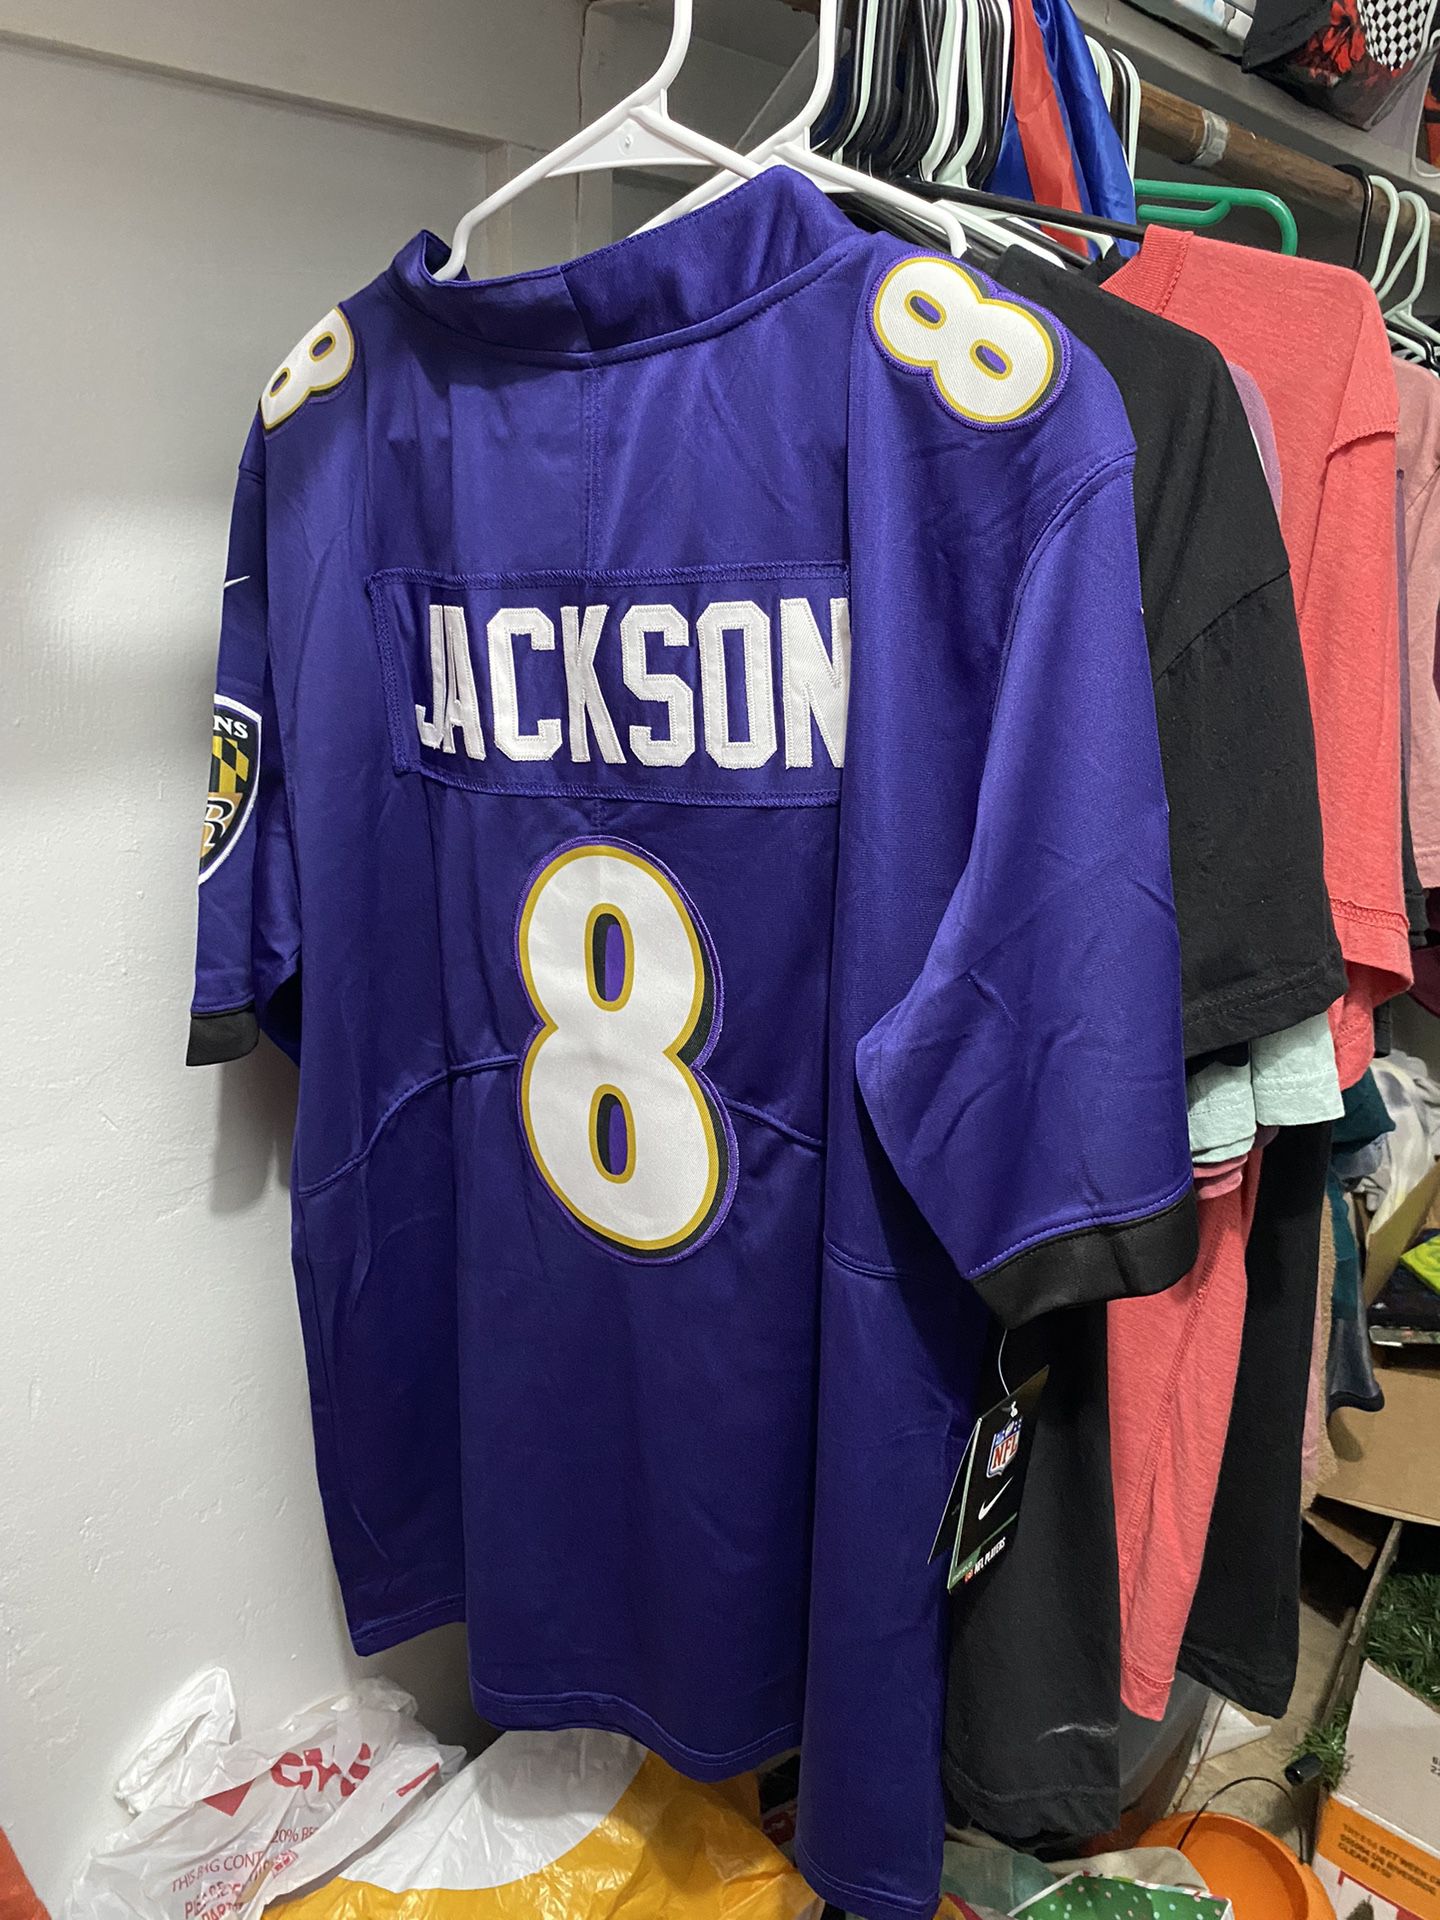 Lamar Jackson  Stitched NFL Jersey  Brand New!  Baltimore Ravens  Size Large and XL available   Shipping available  Located in pompano beach, Fl